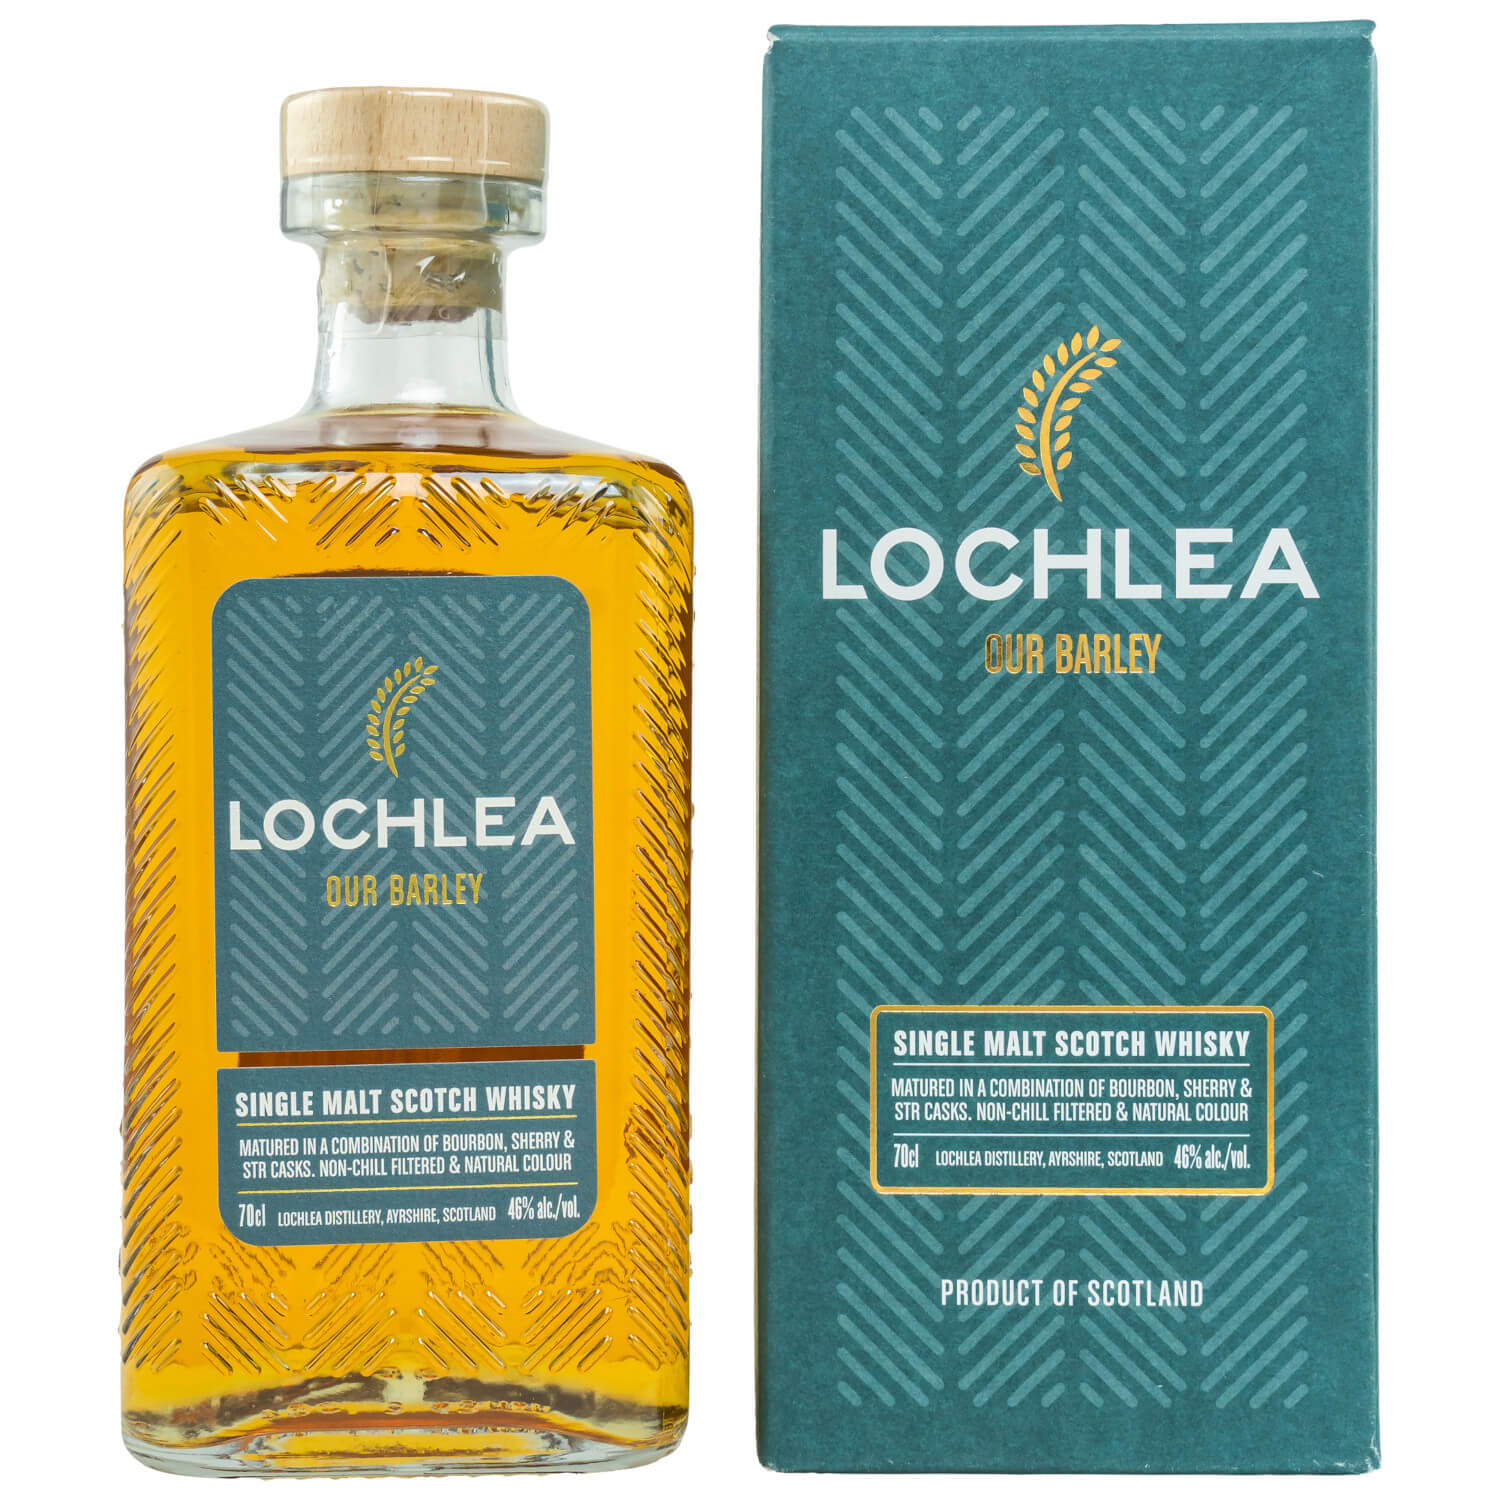 Eckige Flasche und Verpackung Lochlea Our Barley Whisky